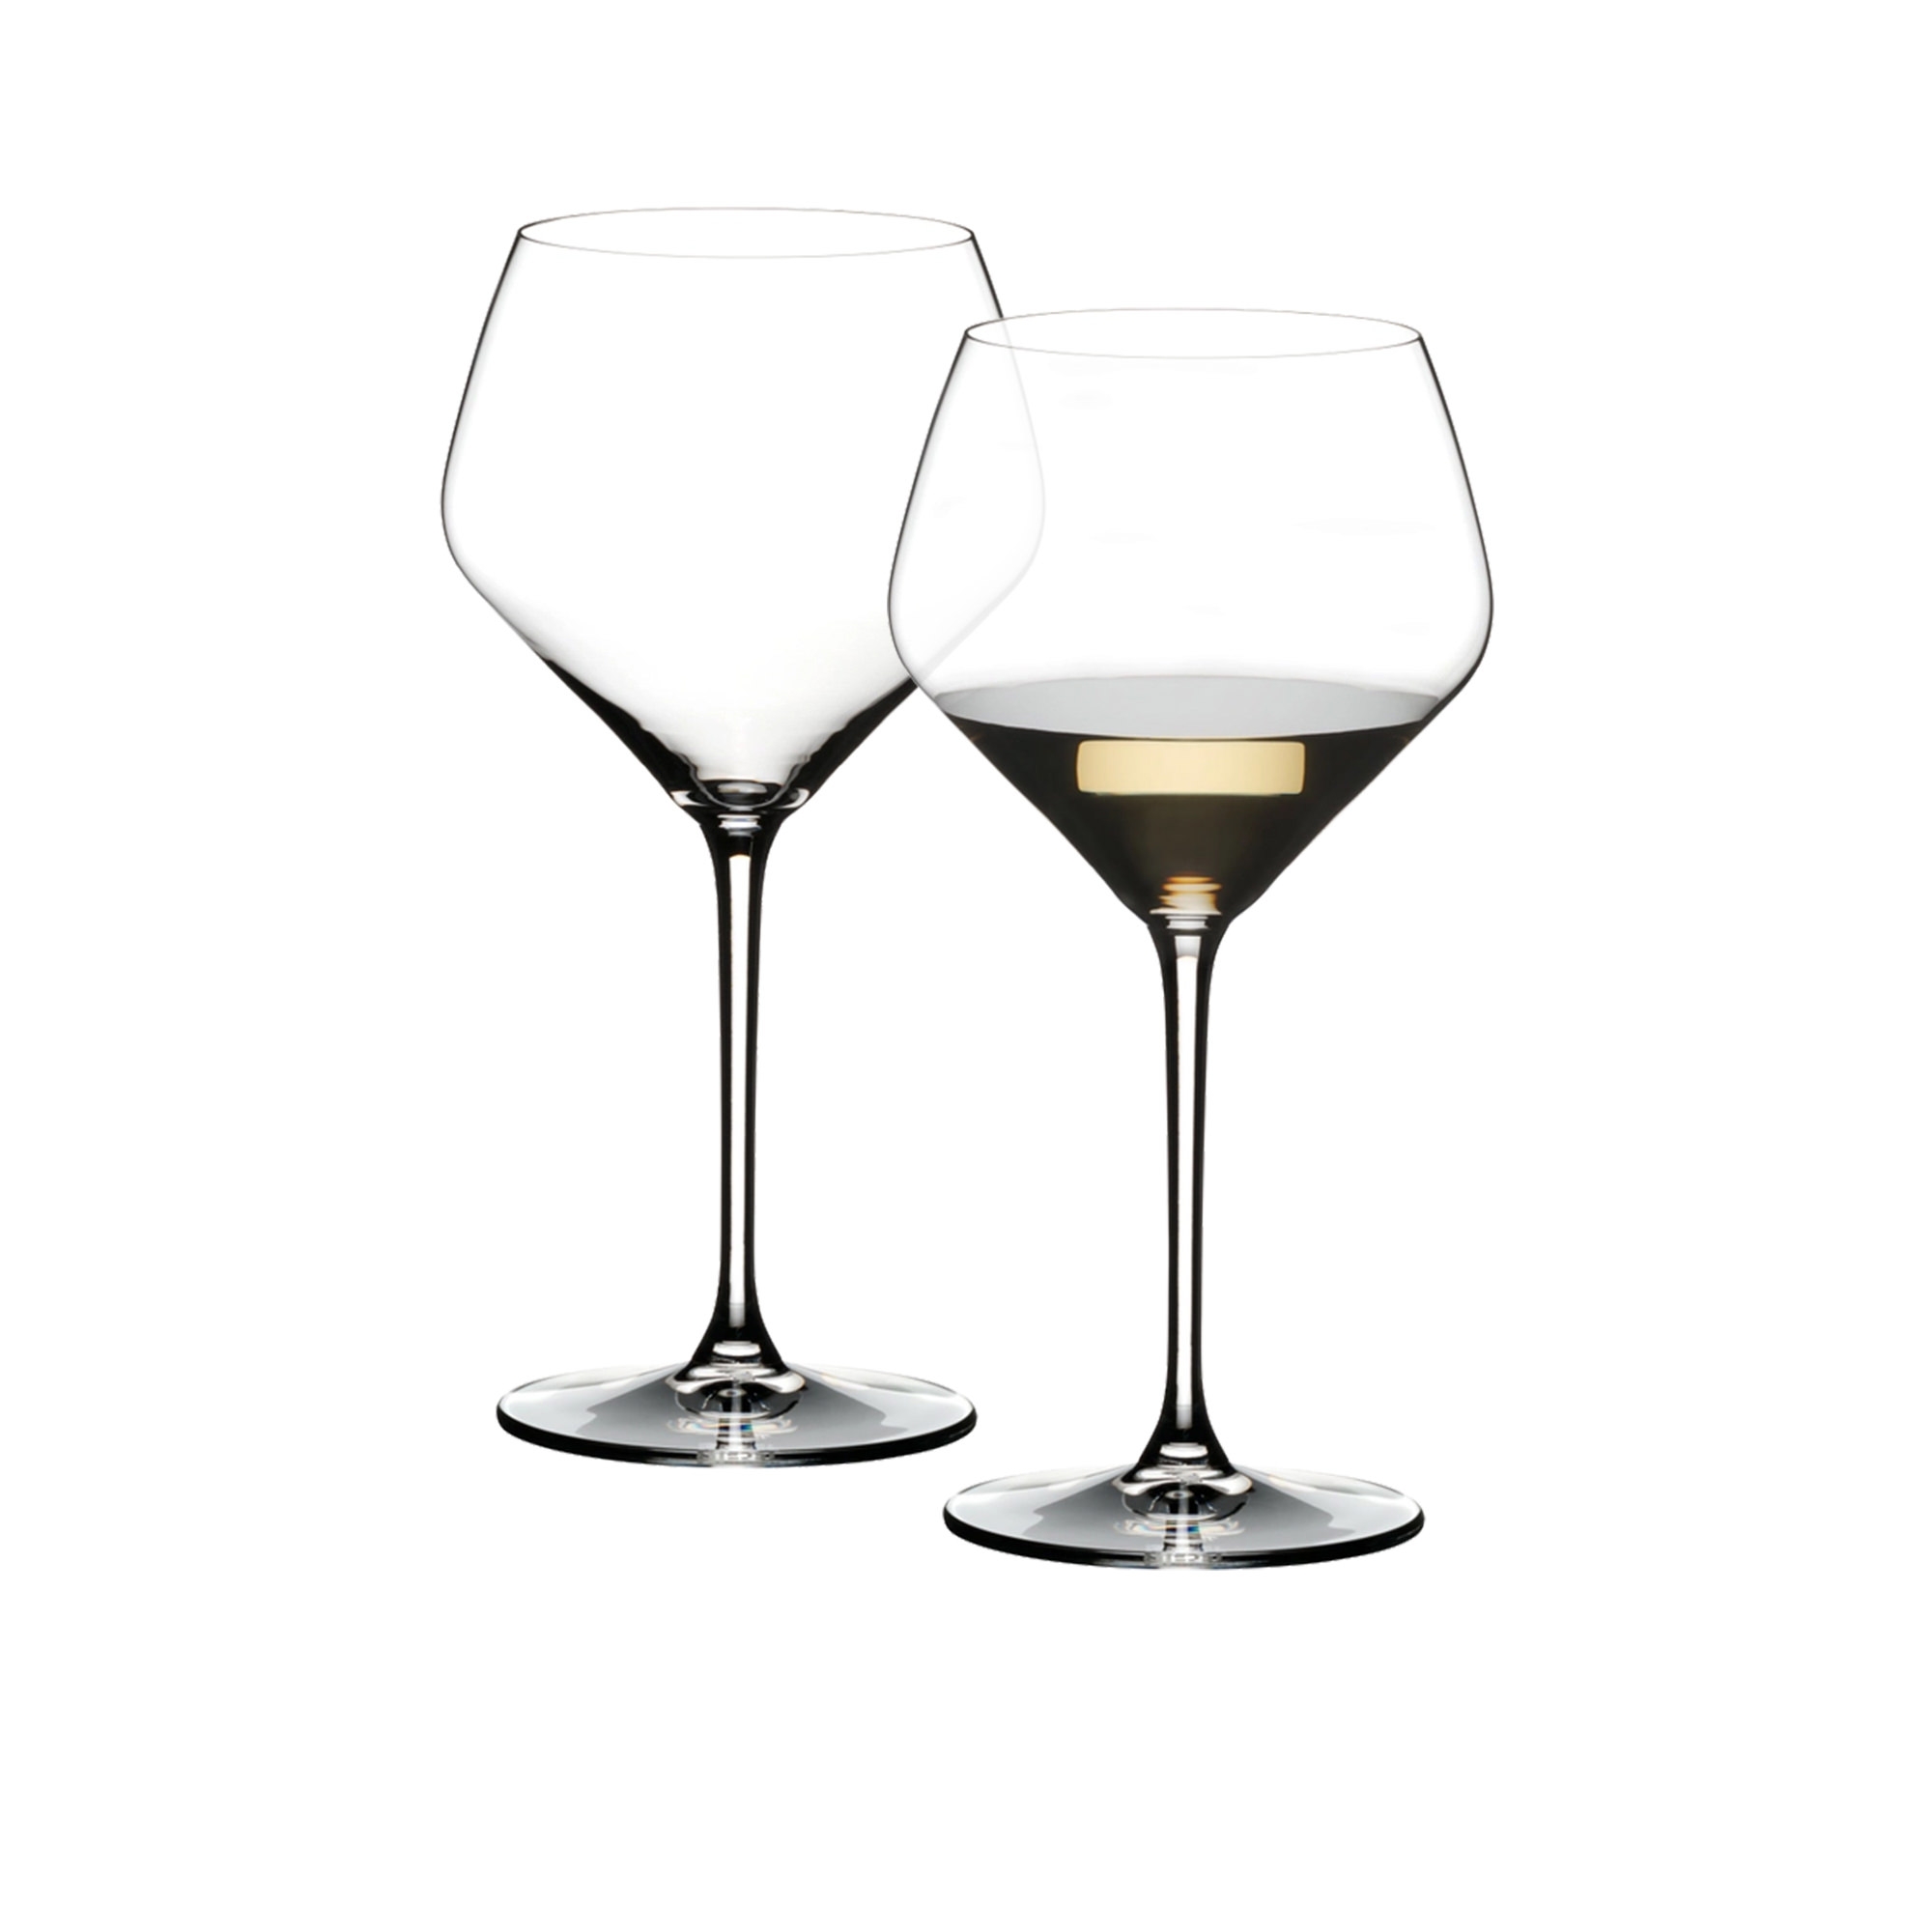 Riedel Extreme Oaked Chardonnay Glass 670ml Set of 2 Image 1